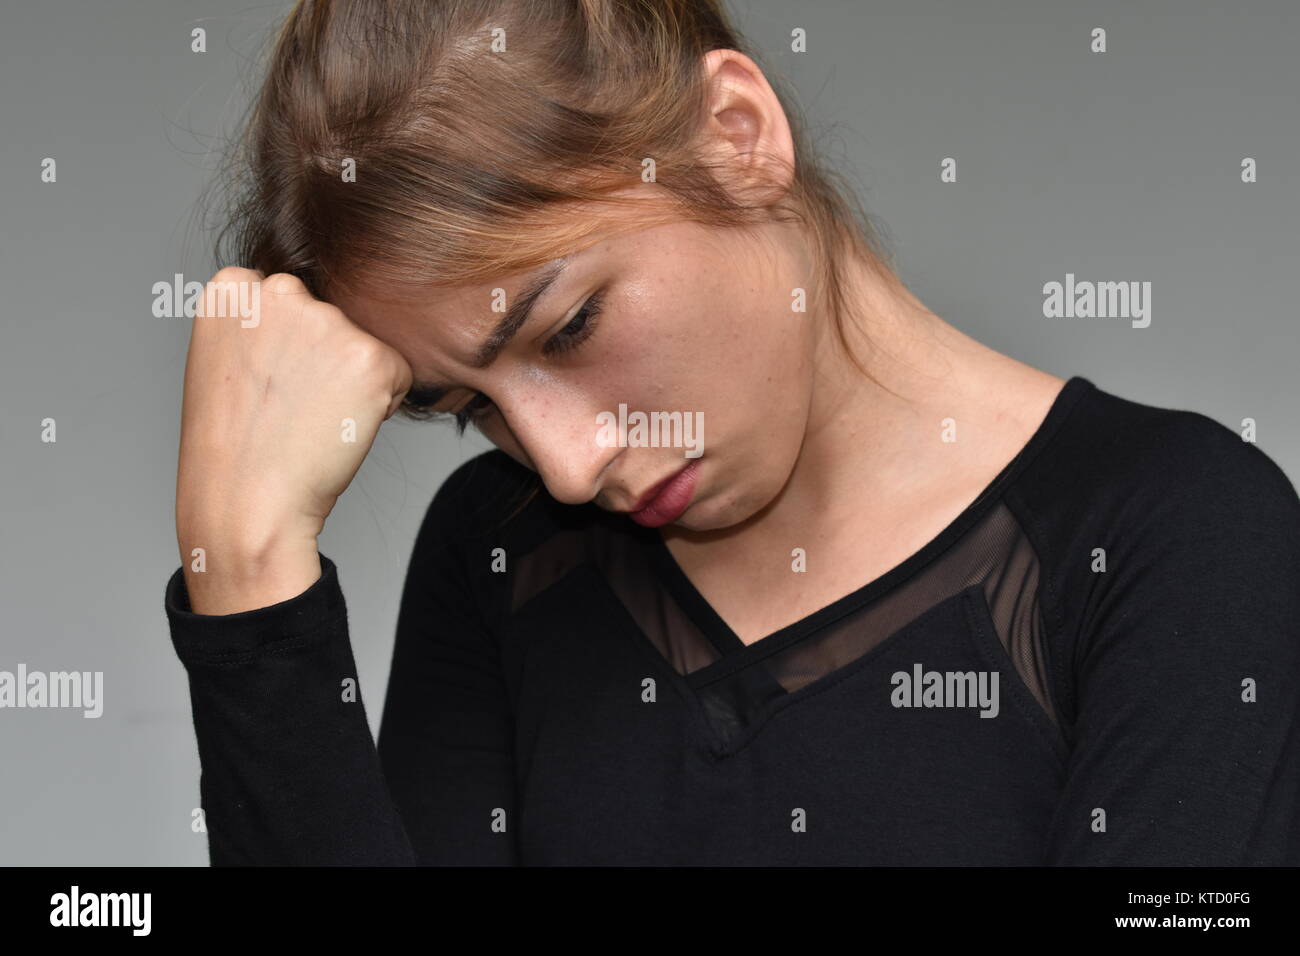 Cute Female Youngster And Sadness Stock Photo